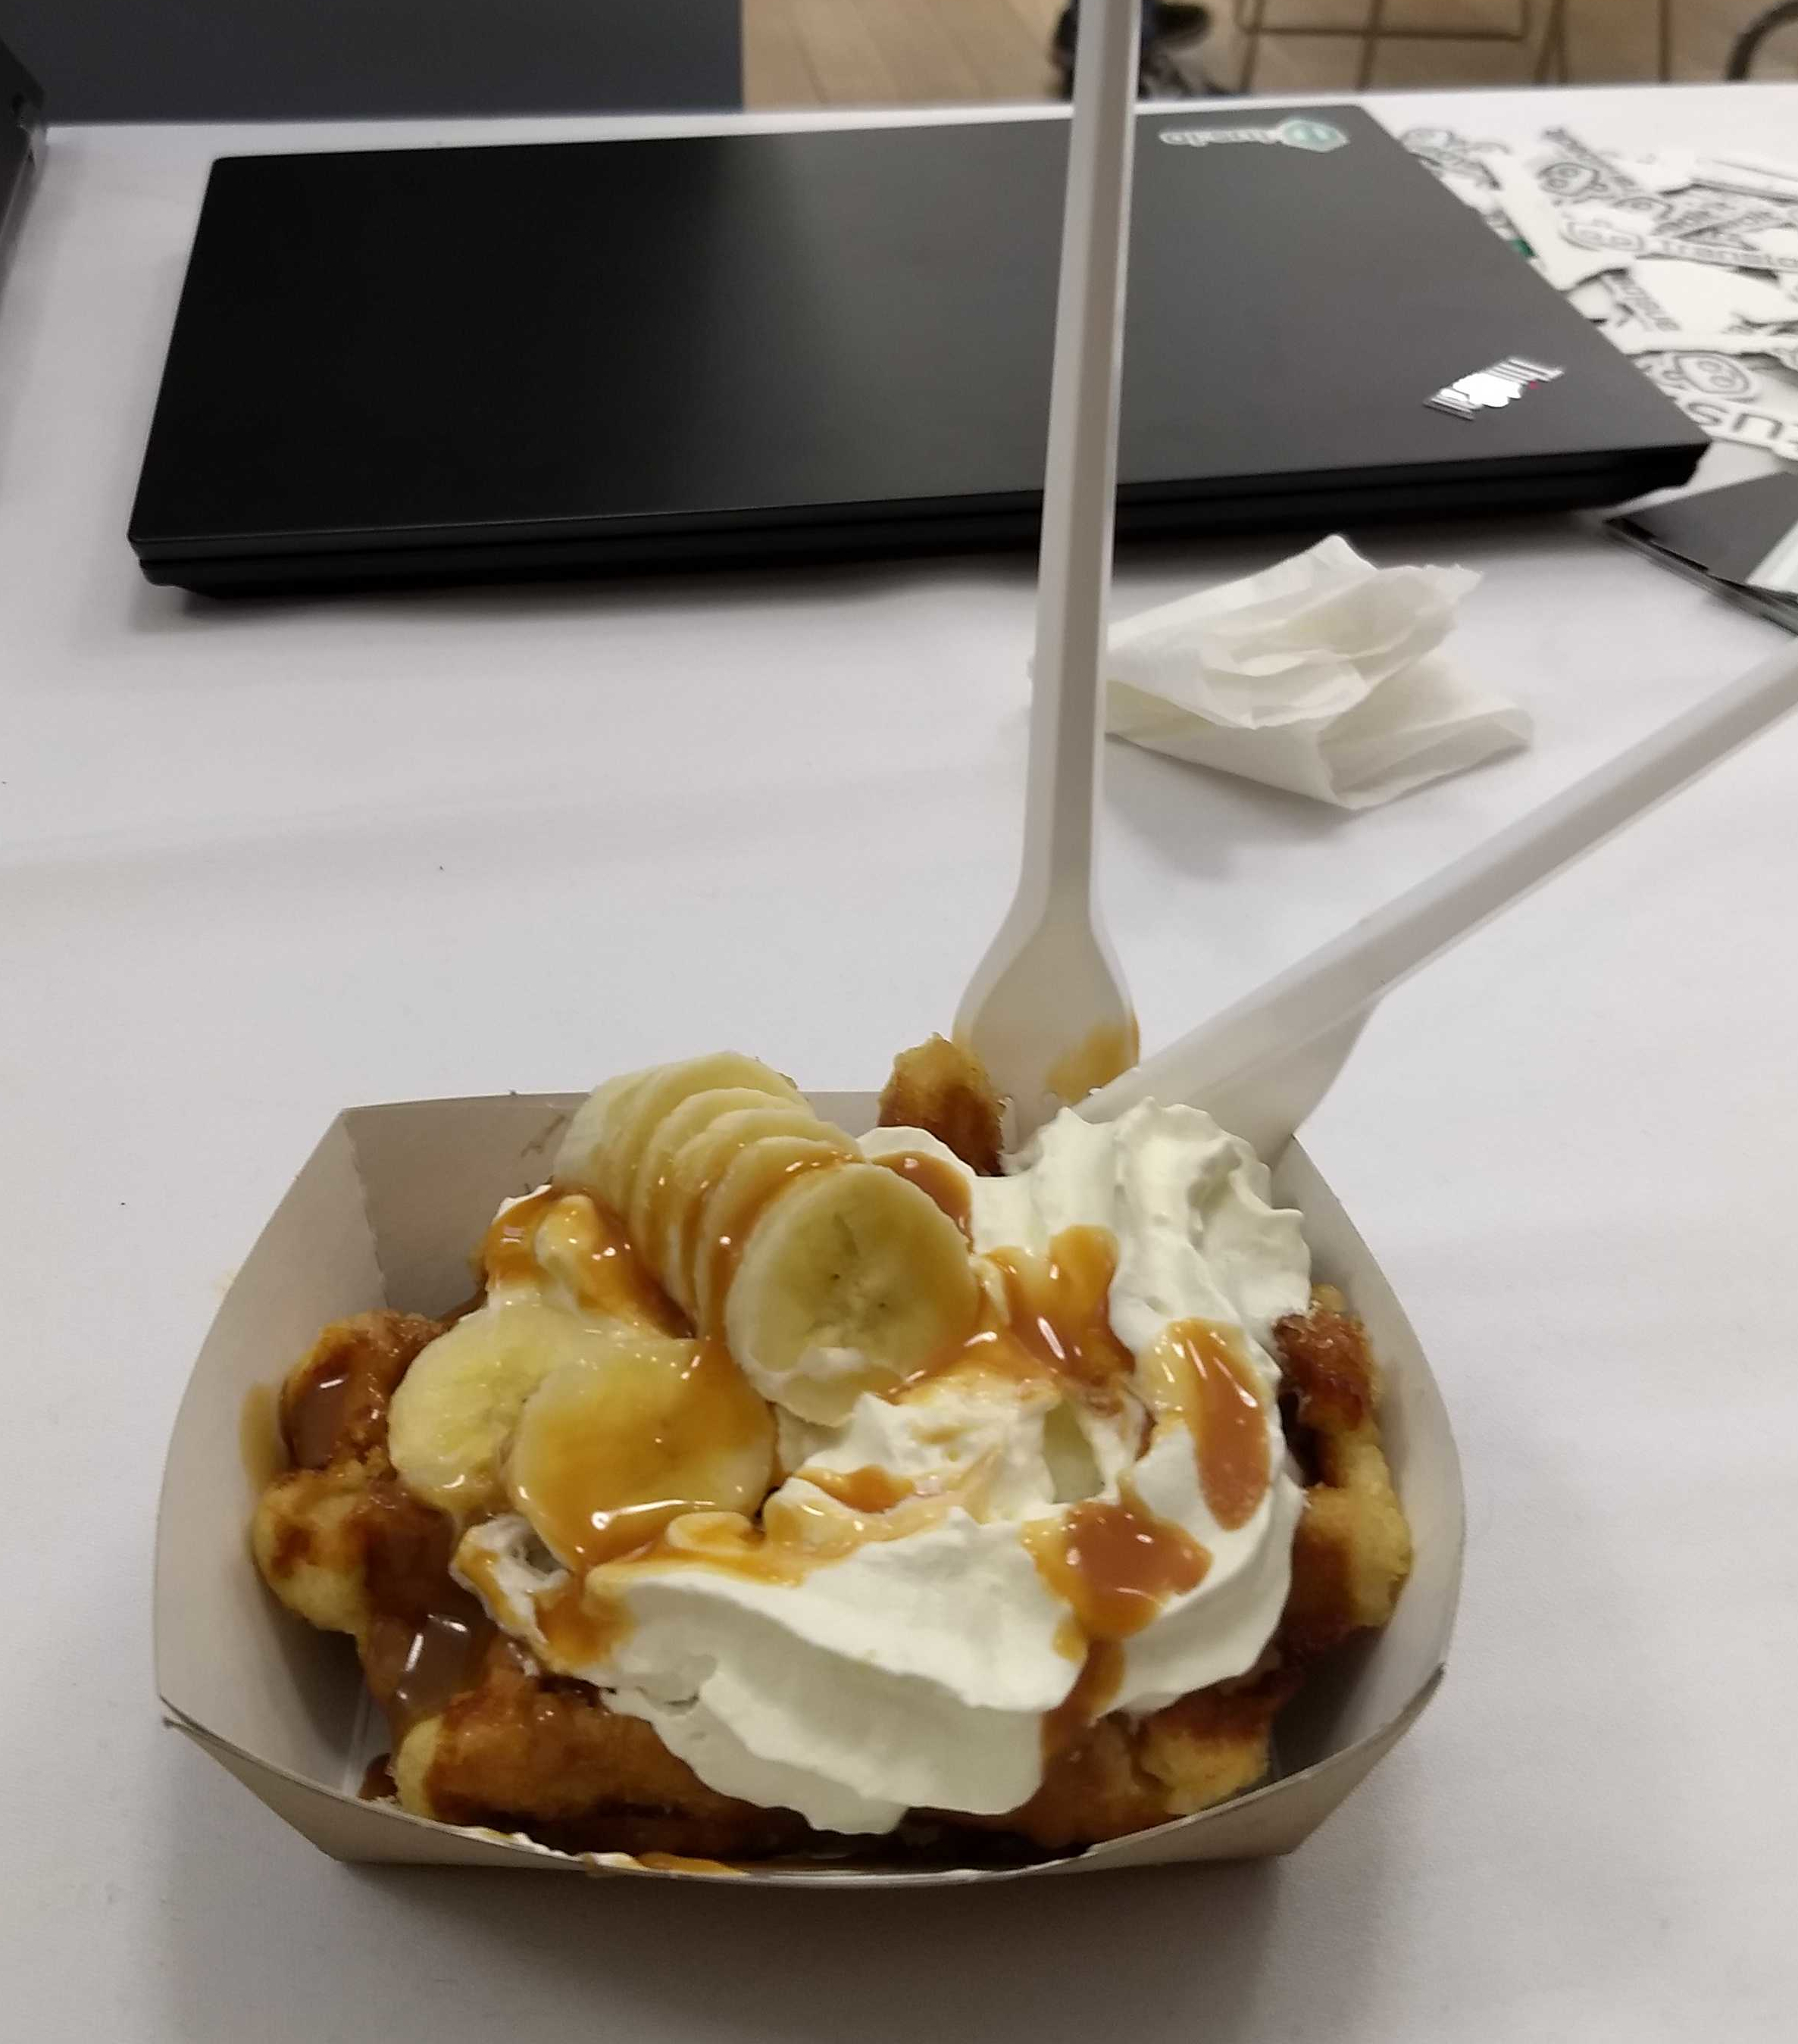 A photo of a waffle with whipped cream and banana